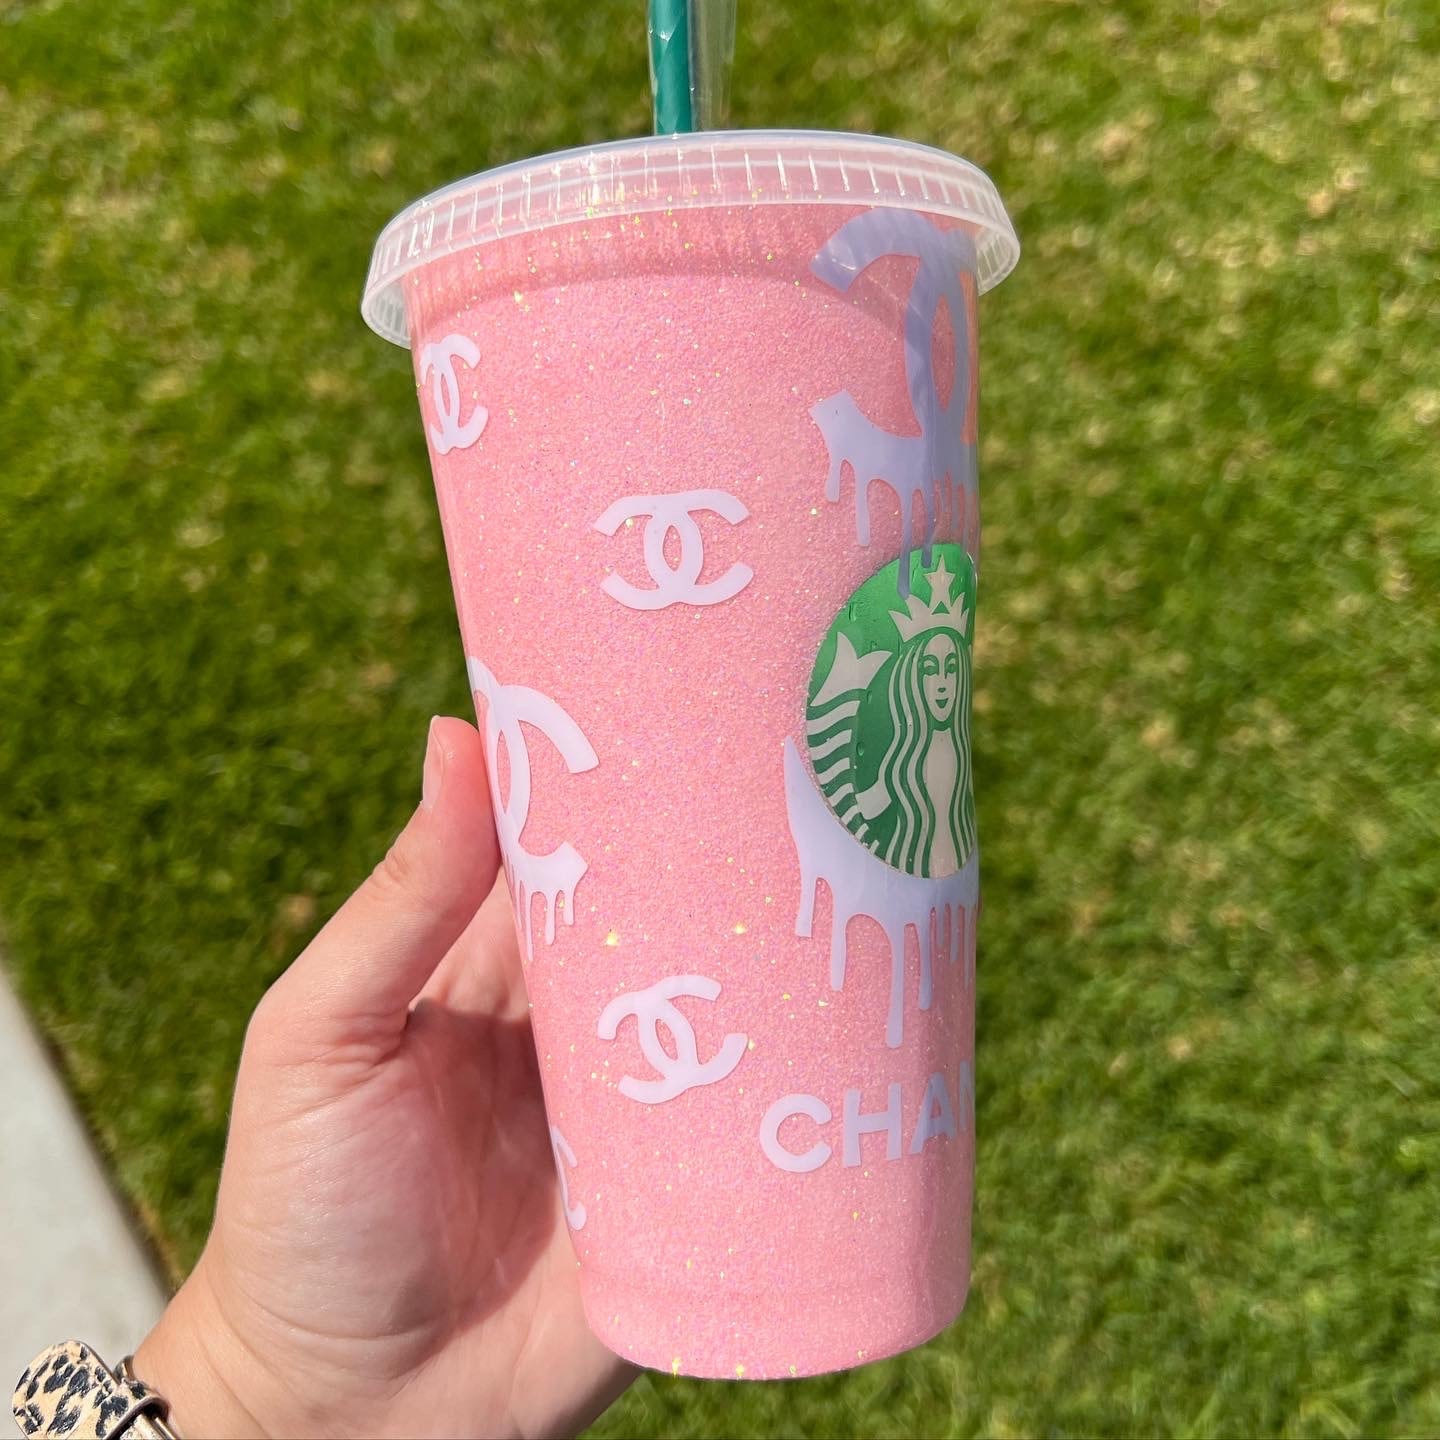 Chanel inspired starbucks cup